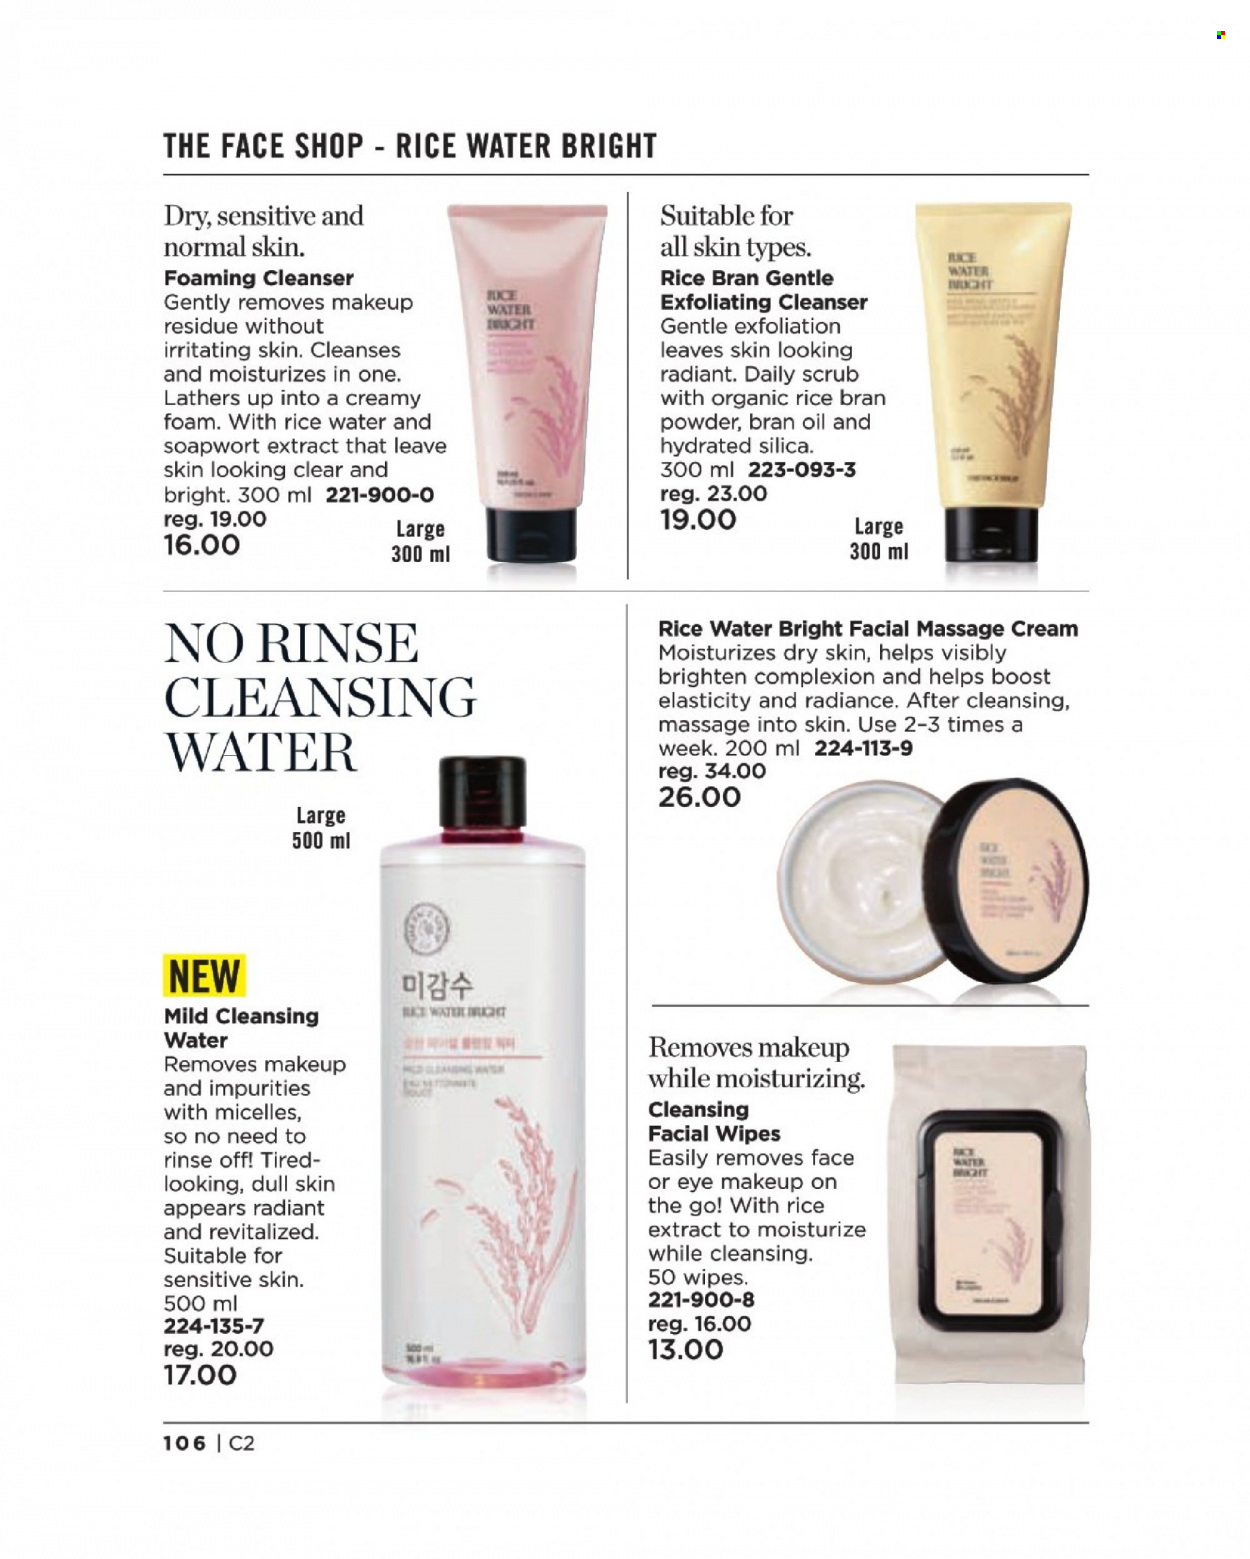 thumbnail - Avon Flyer - Sales products - wipes, cleanser, Daily Scrub, makeup, Go!. Page 106.